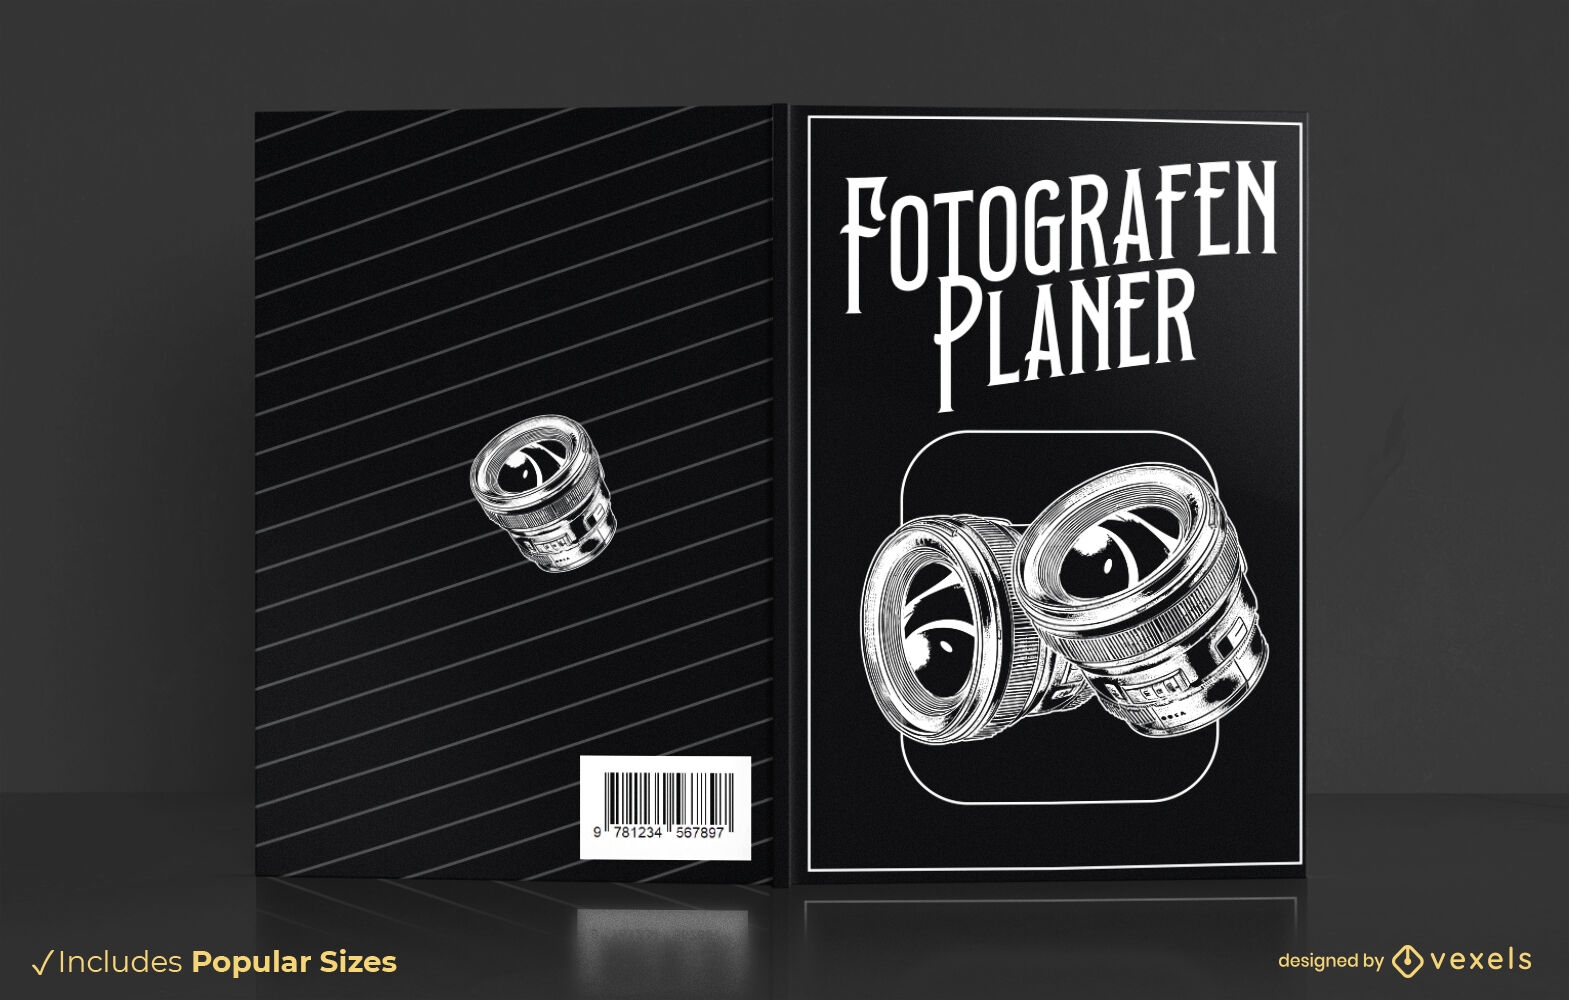 Photographer planner book cover design